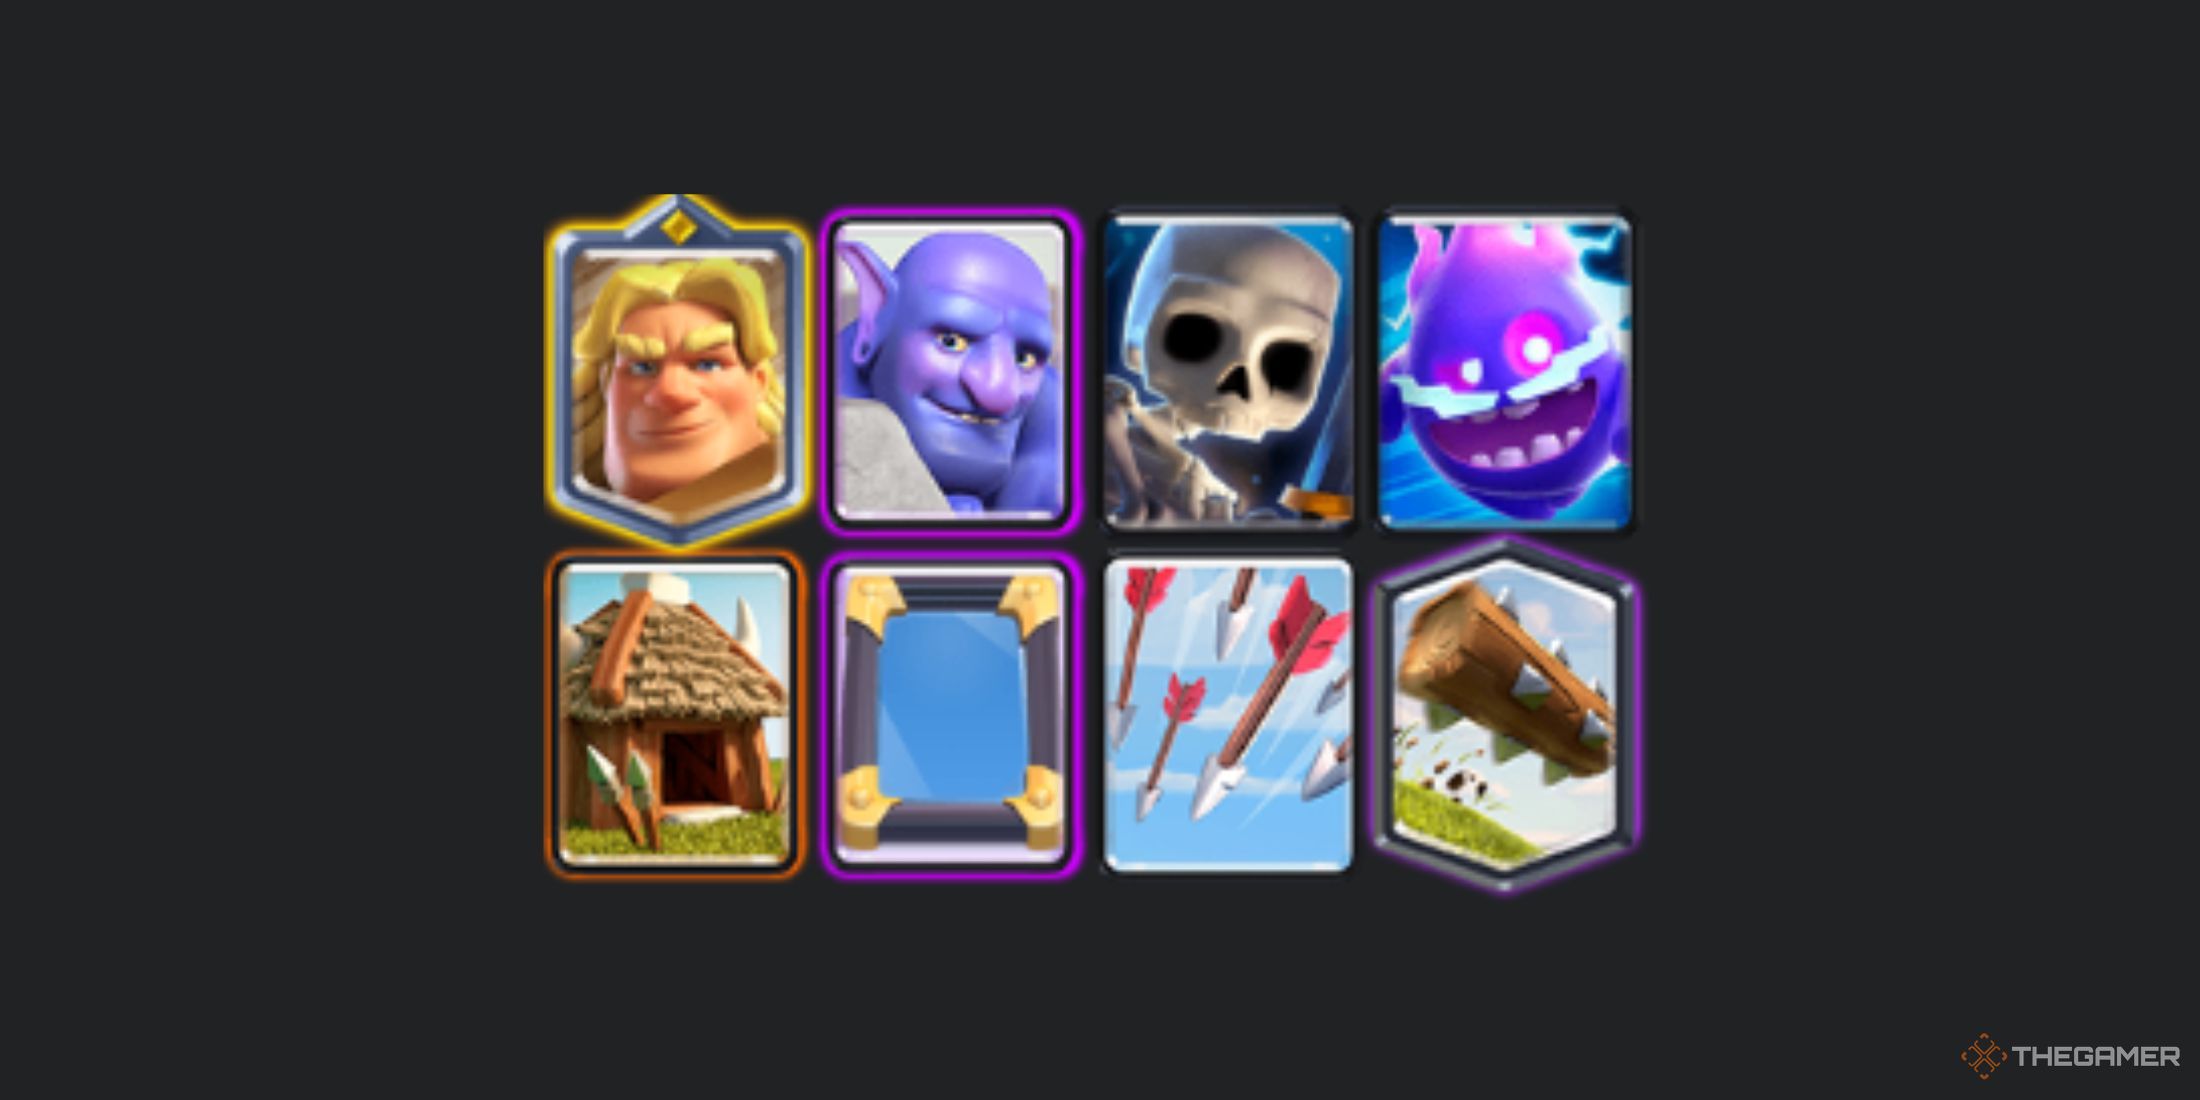 A deck in Clash Royale with Golden Knight, Bowler, Skeletons, Electro Spirit, Goblin Hut, Mirror Spell, Arrows and Log Spell.